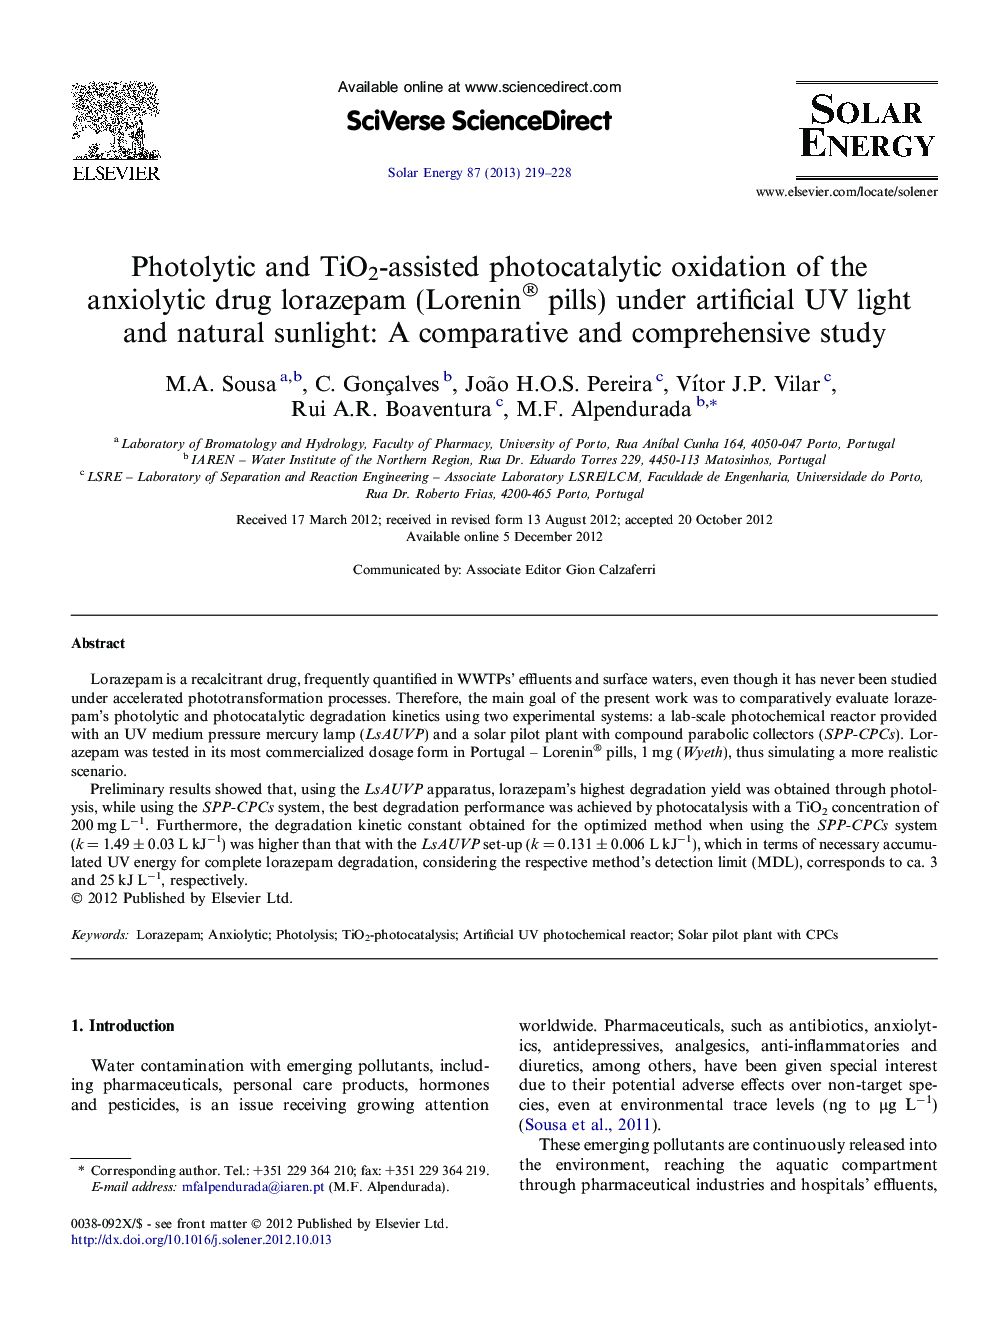 Photolytic and TiO2-assisted photocatalytic oxidation of the anxiolytic drug lorazepam (Lorenin® pills) under artificial UV light and natural sunlight: A comparative and comprehensive study